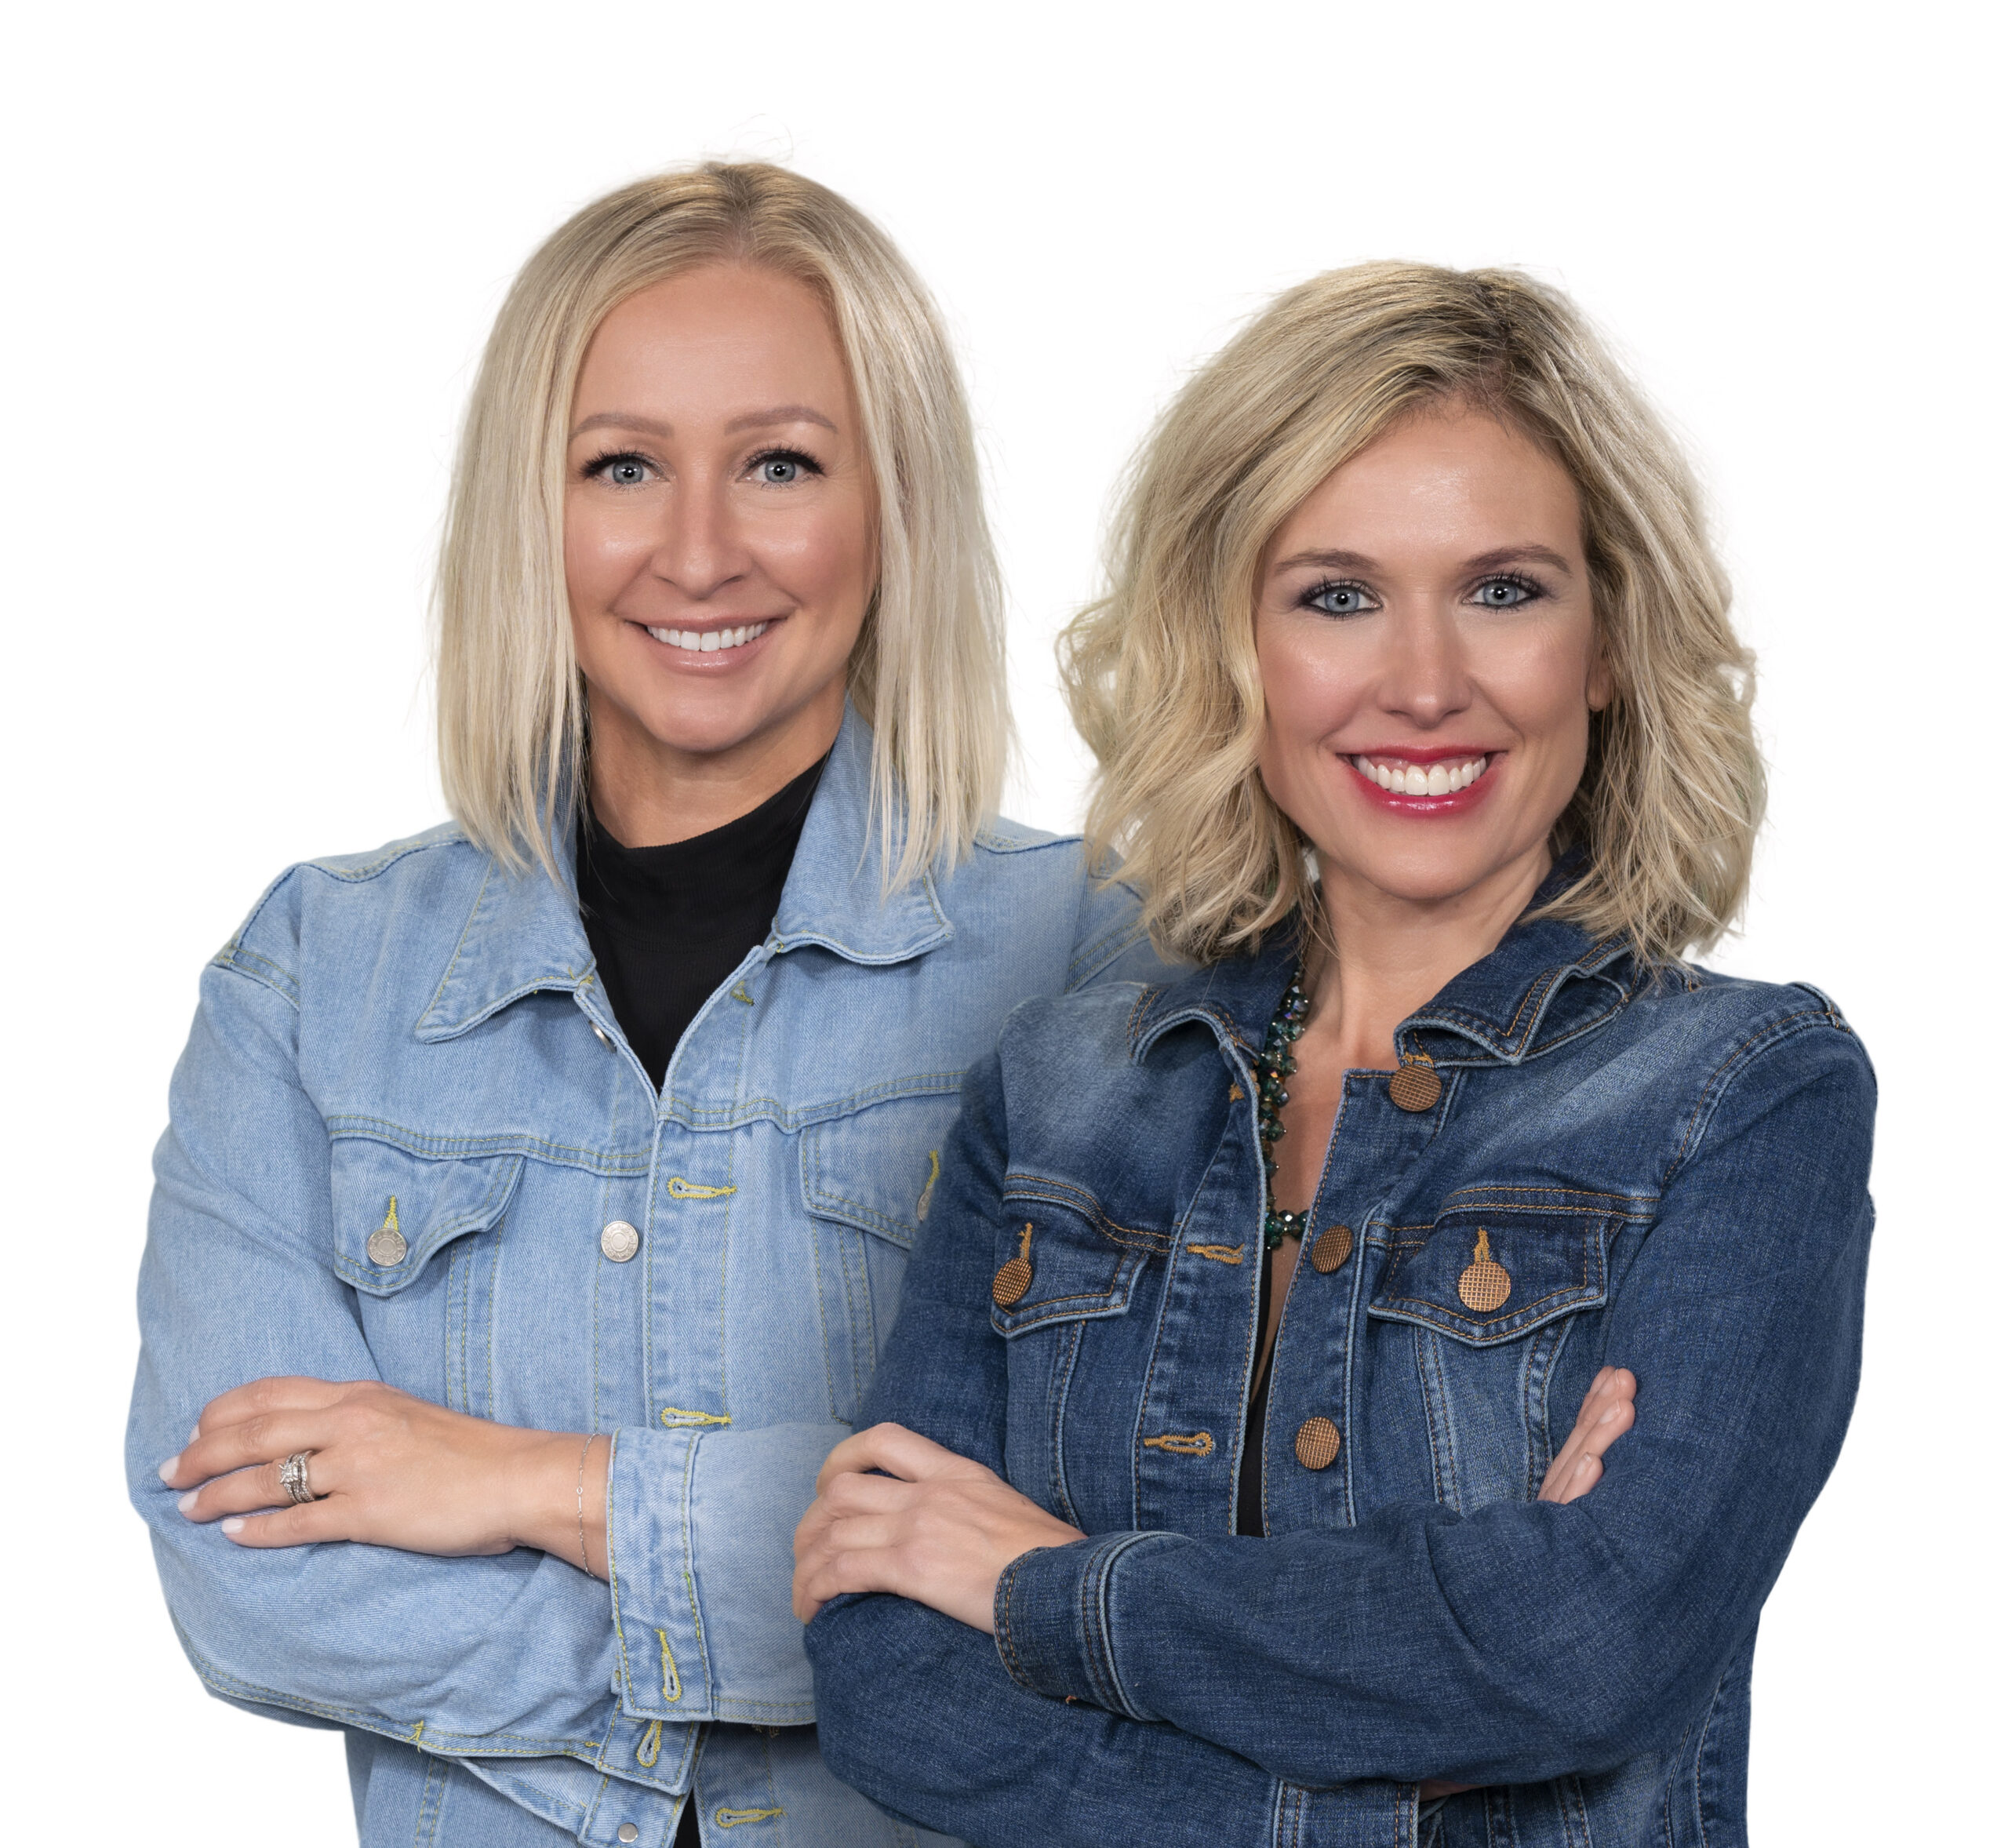 Corrie Lake and Jenalee Piercey Real Estate Brokers with Stellar Realty Northwest in Sisters, Oregon